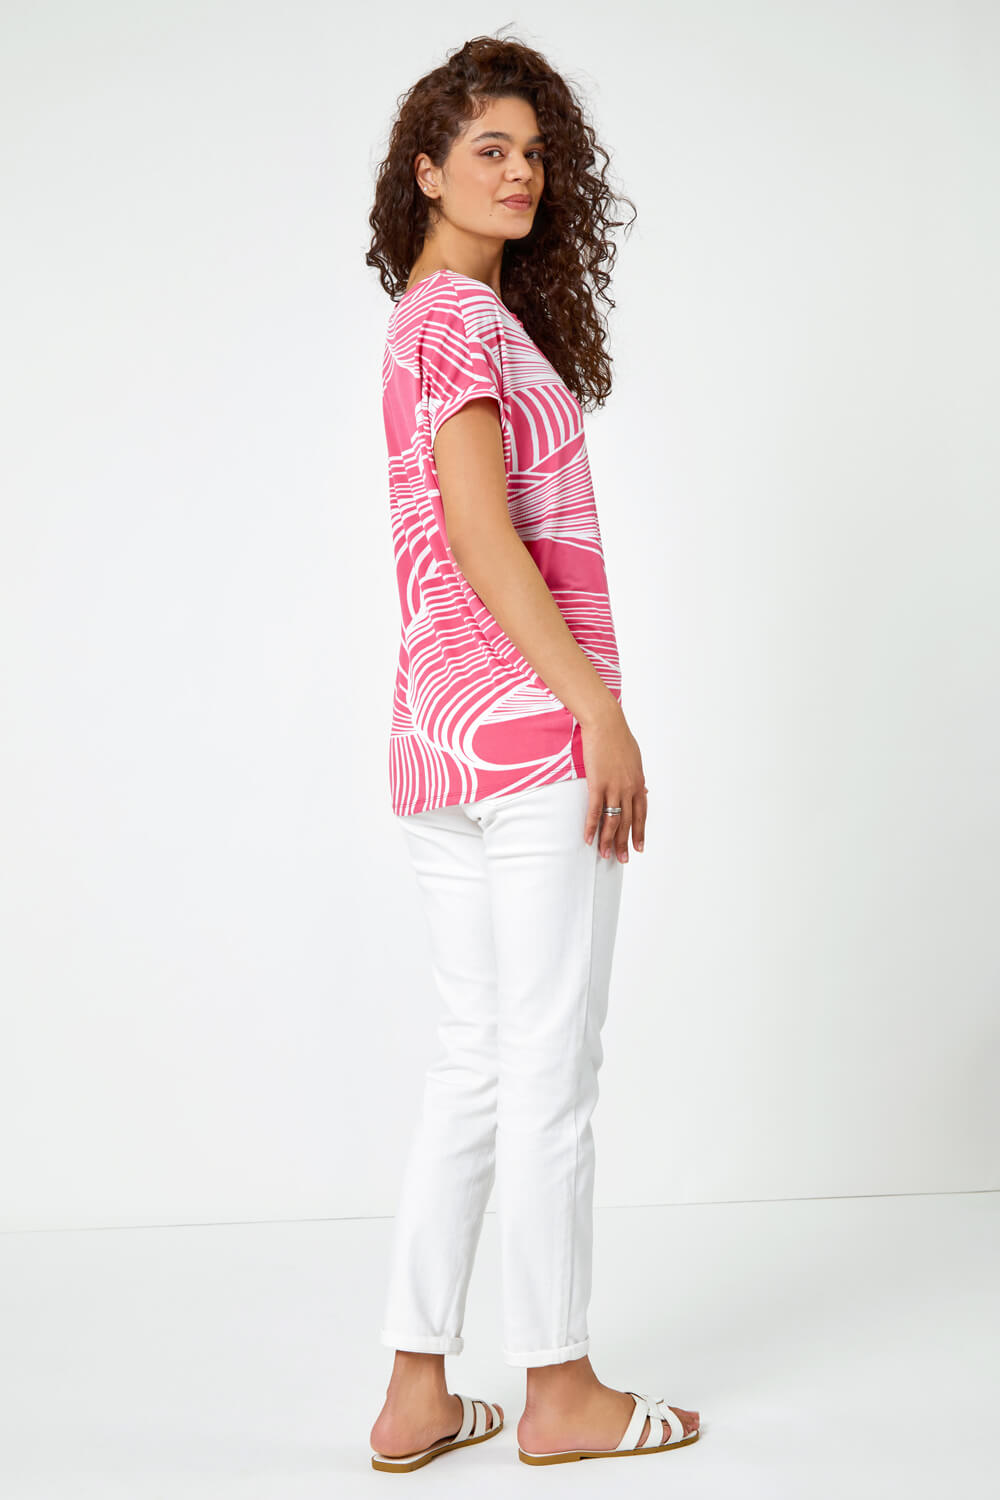 PINK Linear Textured Print Blouson Top, Image 3 of 5